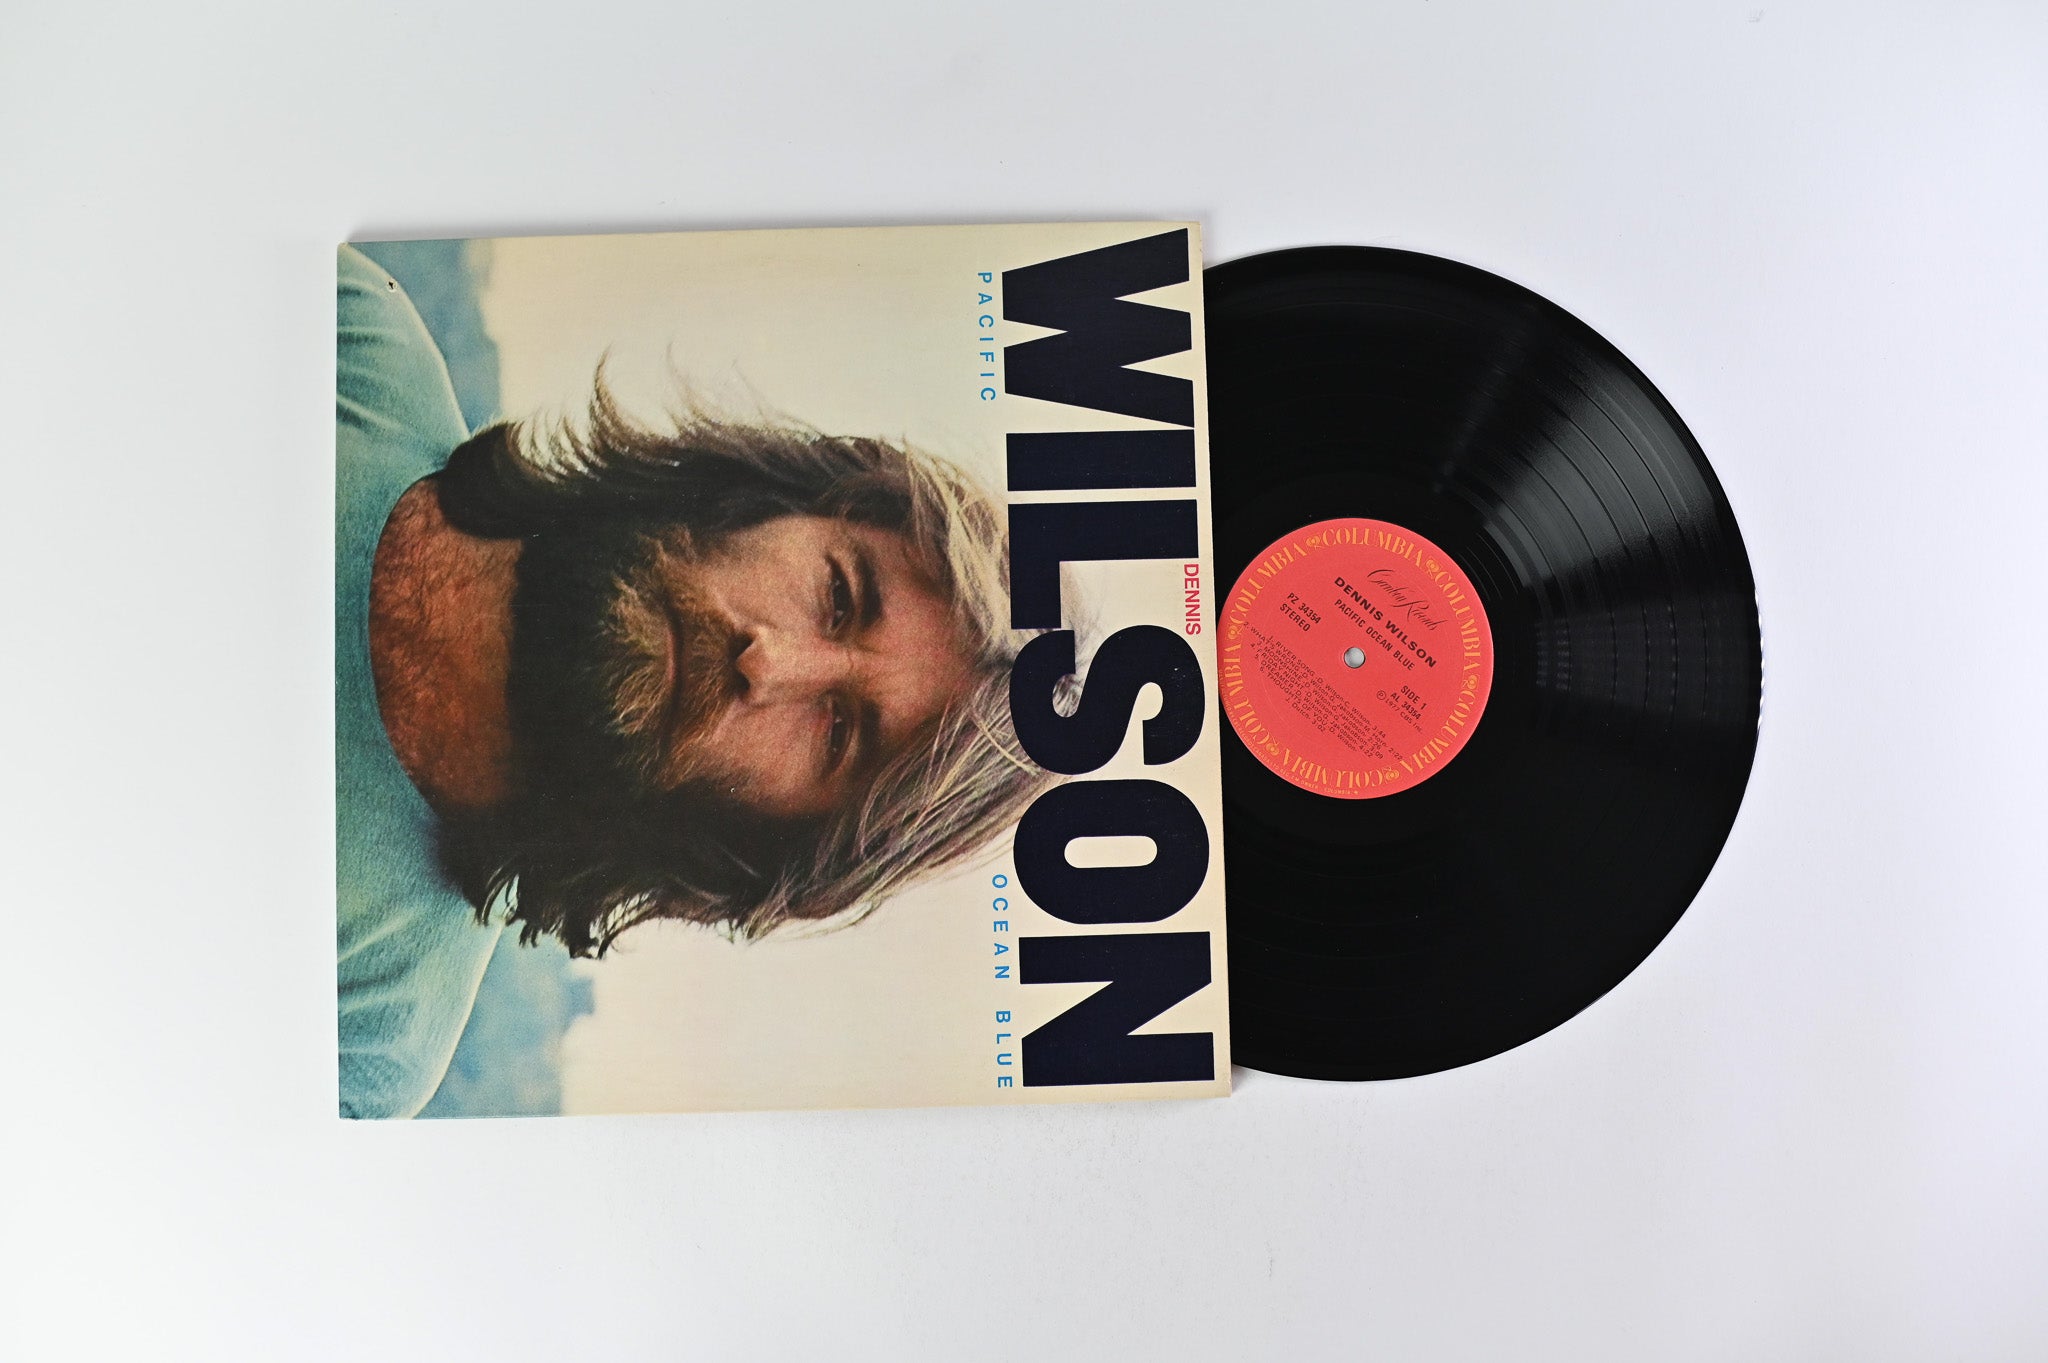 Dennis Wilson - Pacific Ocean Blue on Columbia/Caribou Records